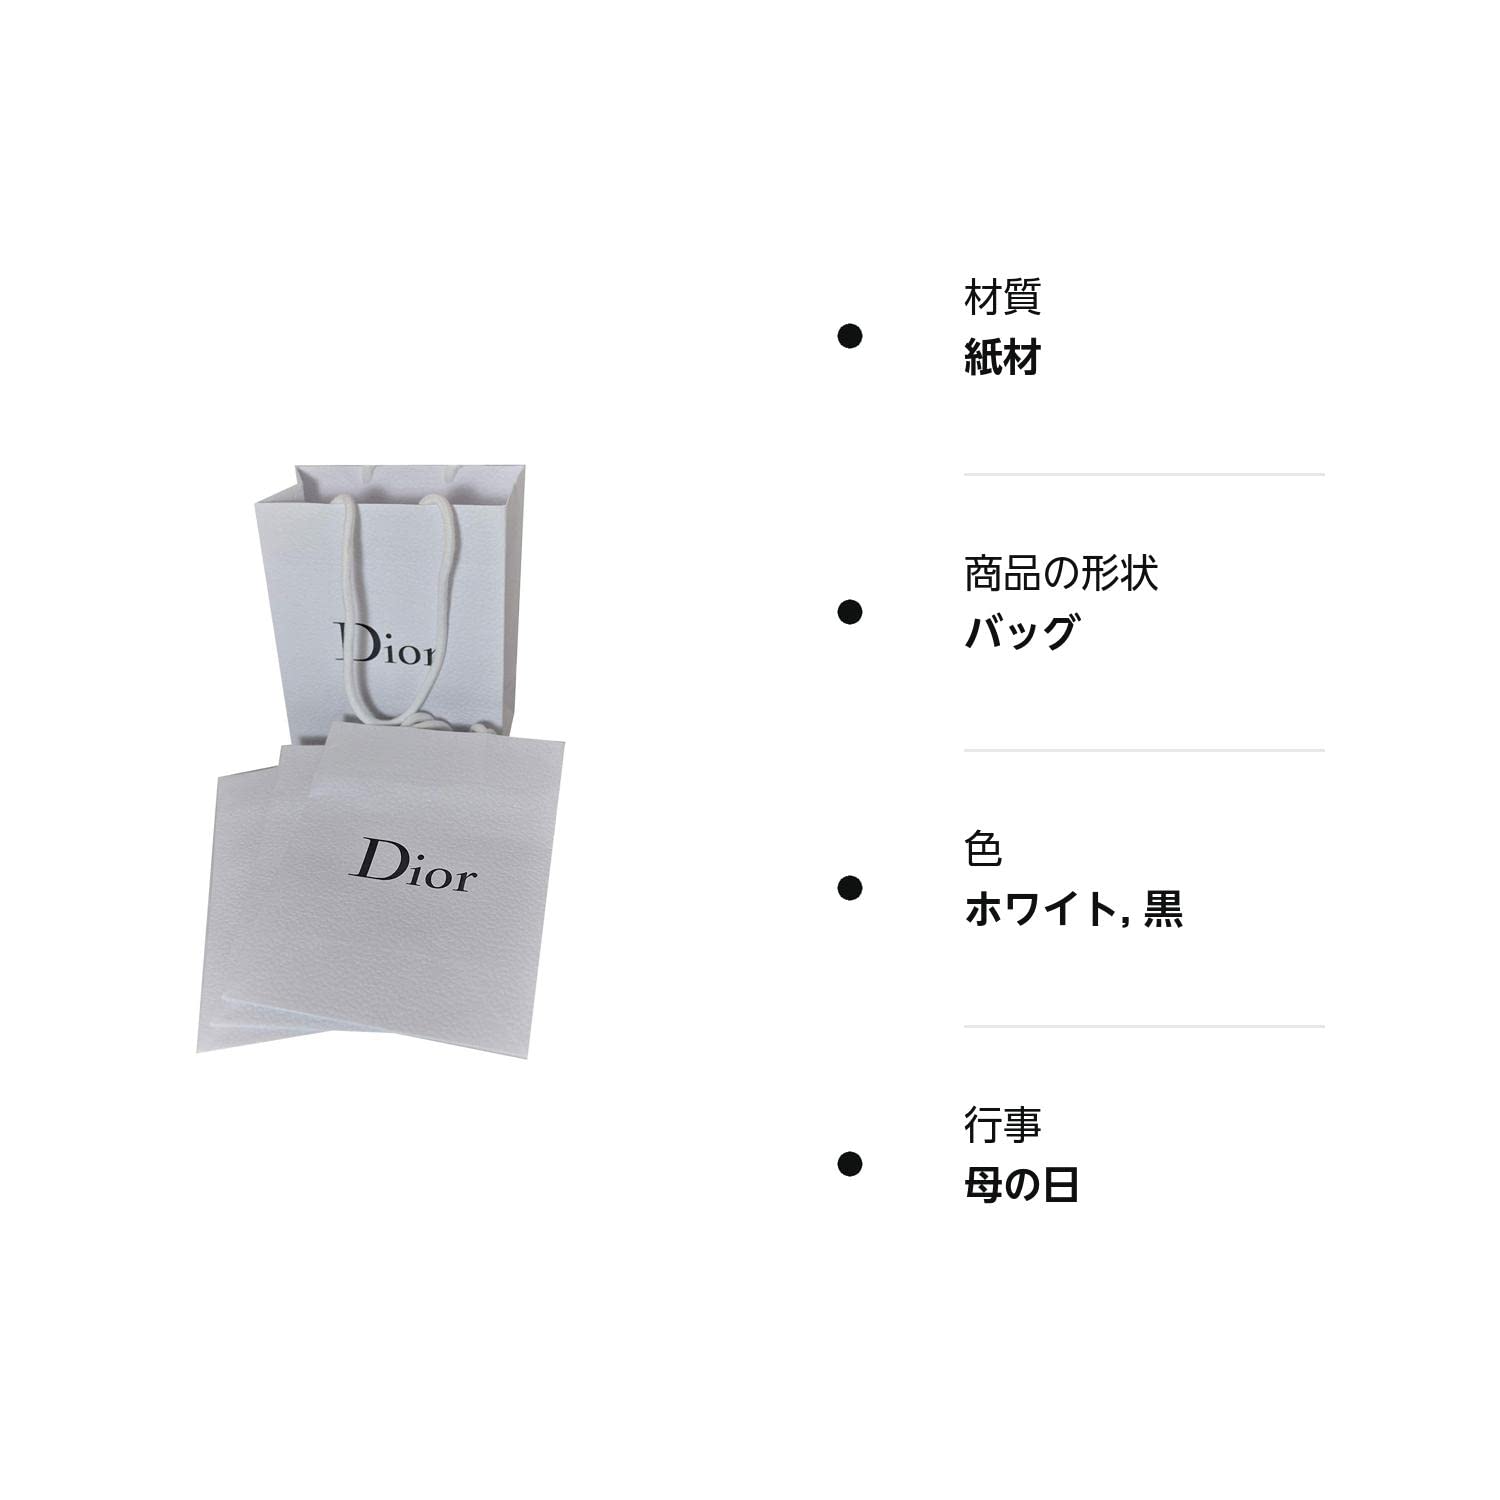 Amazoncojp Christian Dior Authorized Store Paper Bag Paper Bag Shopper  Medium Size H x W x D 89 x 57 x 31 inches 225 x 145 x 8 cm Set  of 4 Mothers Day  Office Products